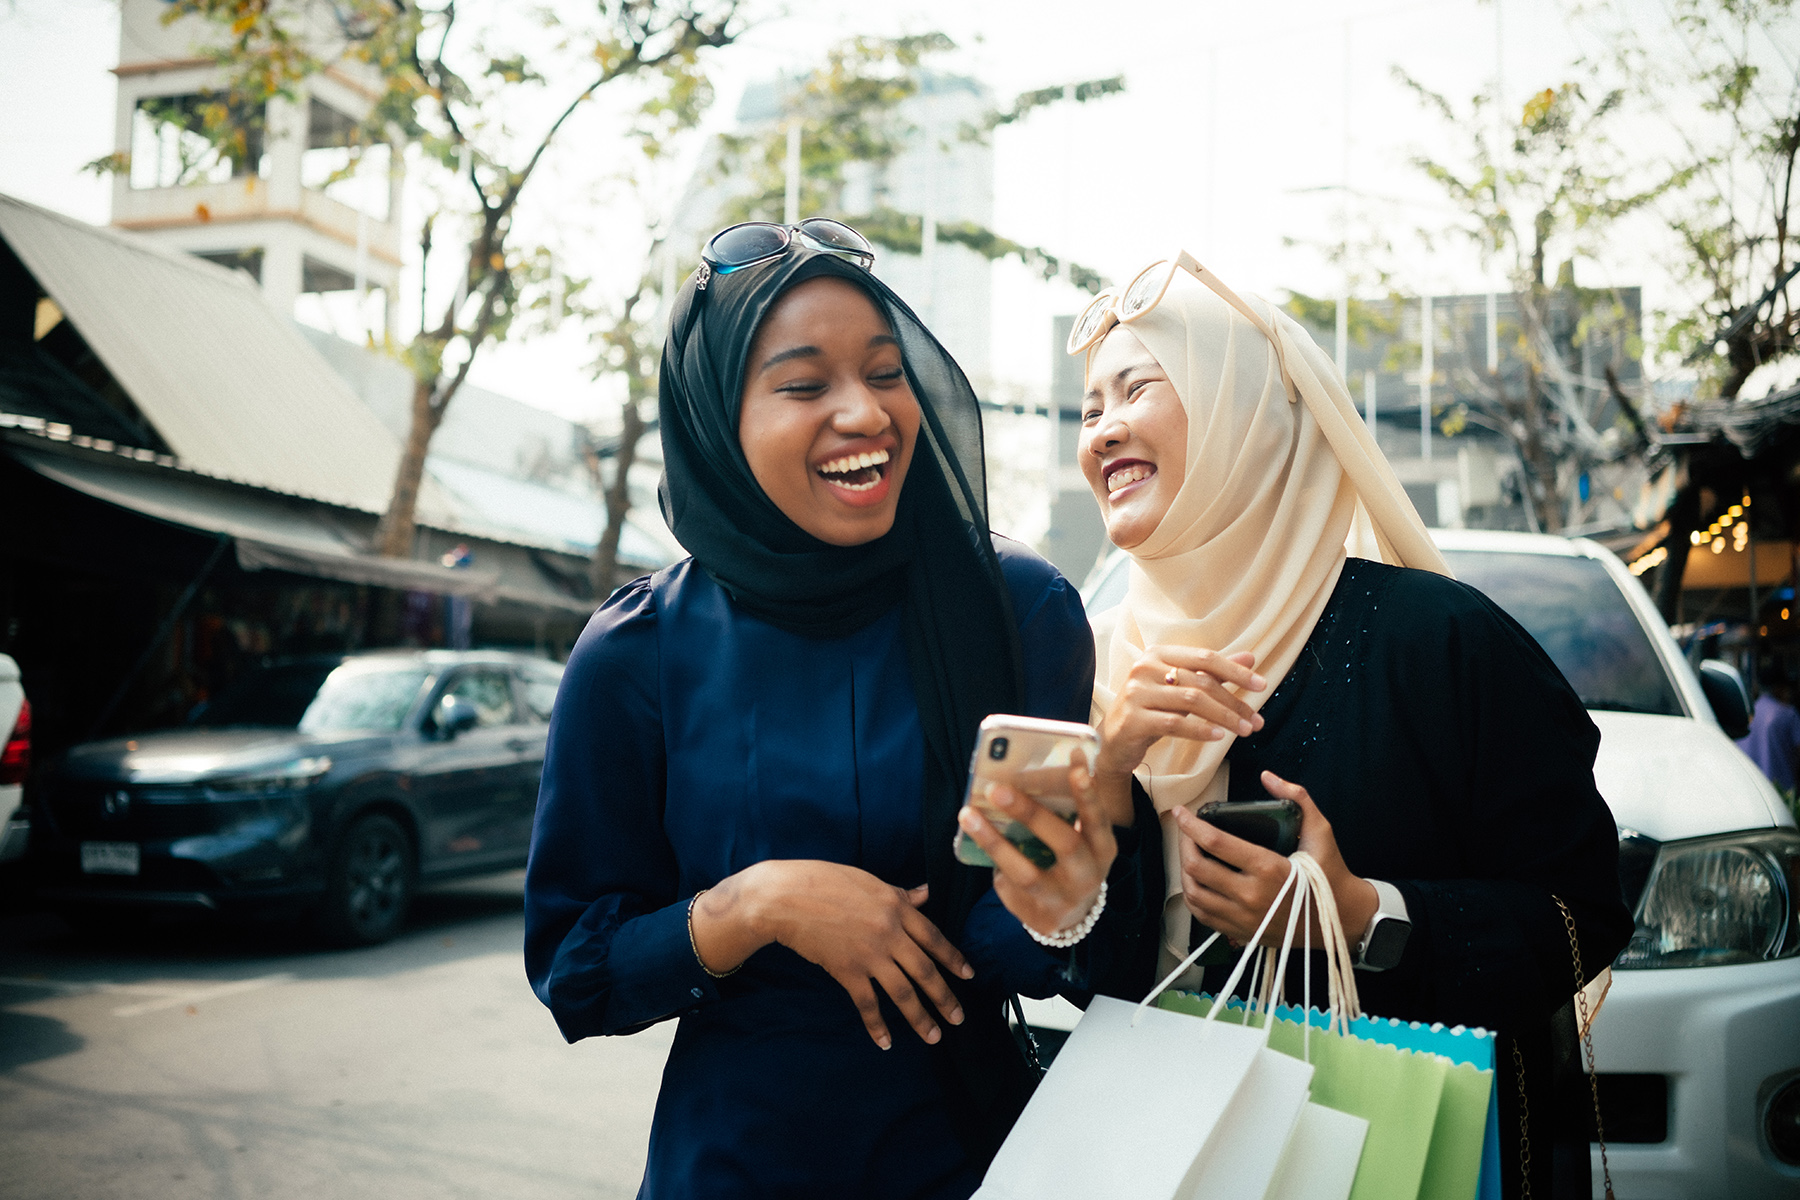 Two women chatting and laughing while holding their mobile phones and shopping

